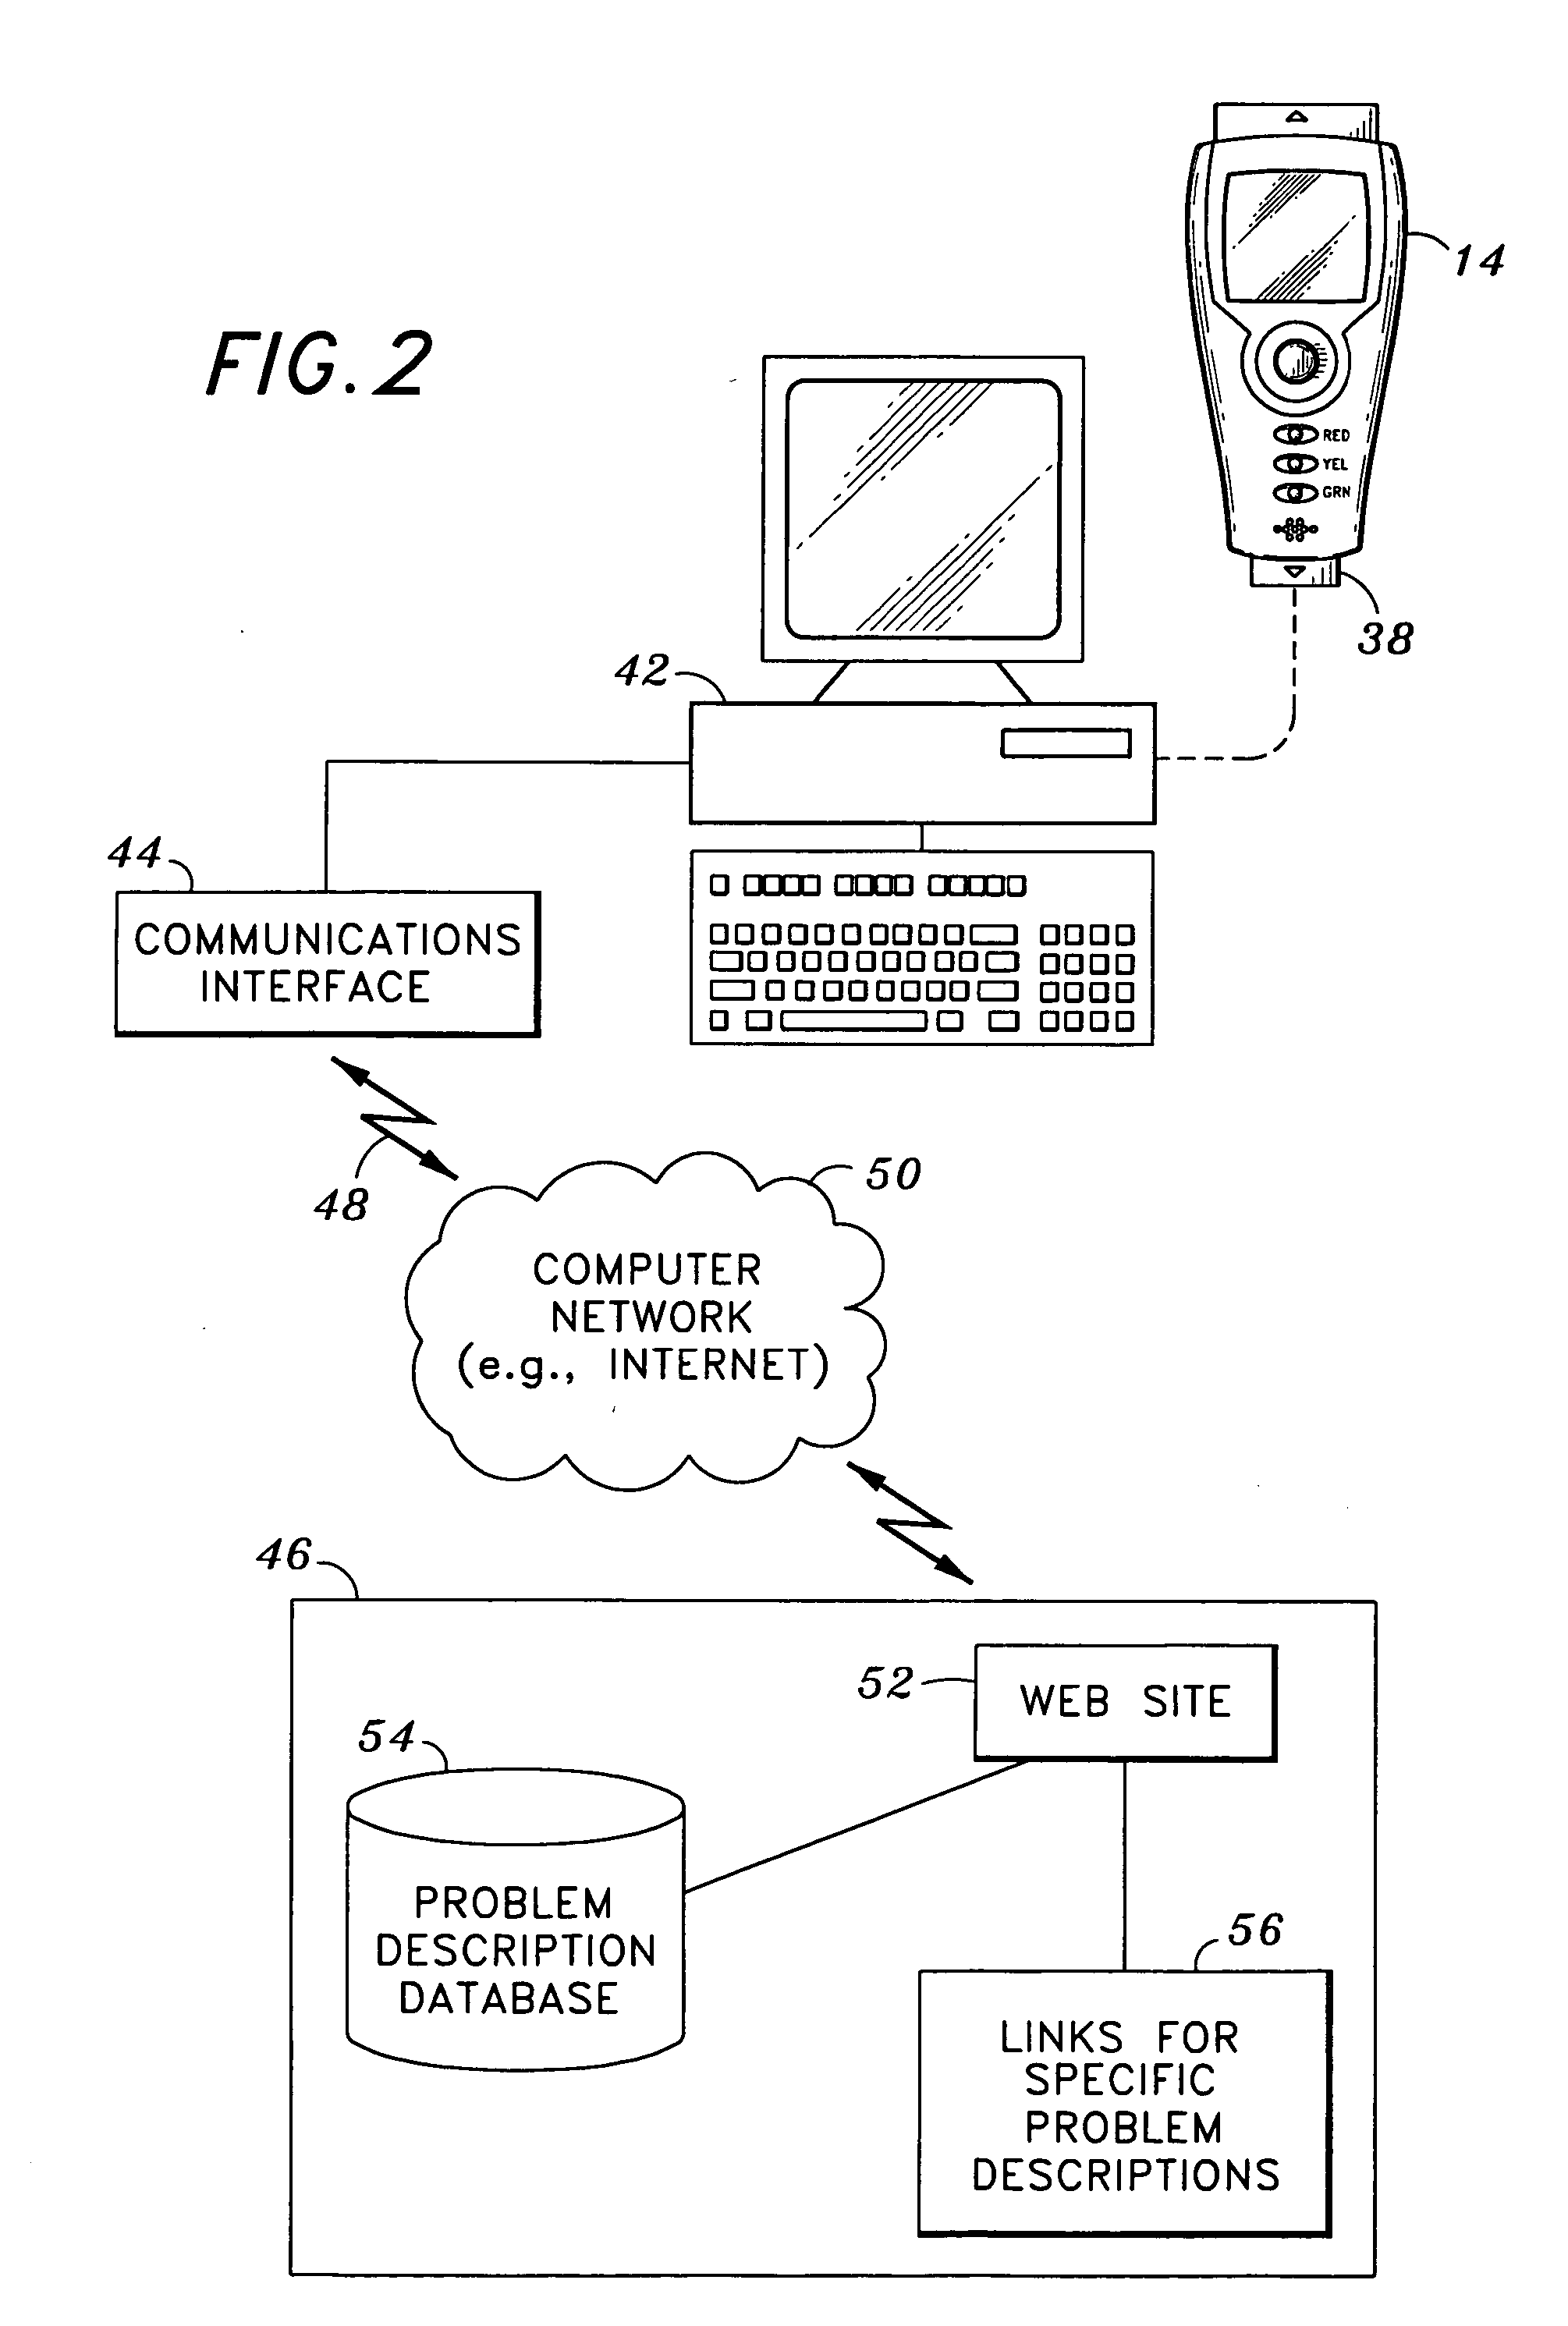 Method and system for computer network implemented vehicle diagnostics